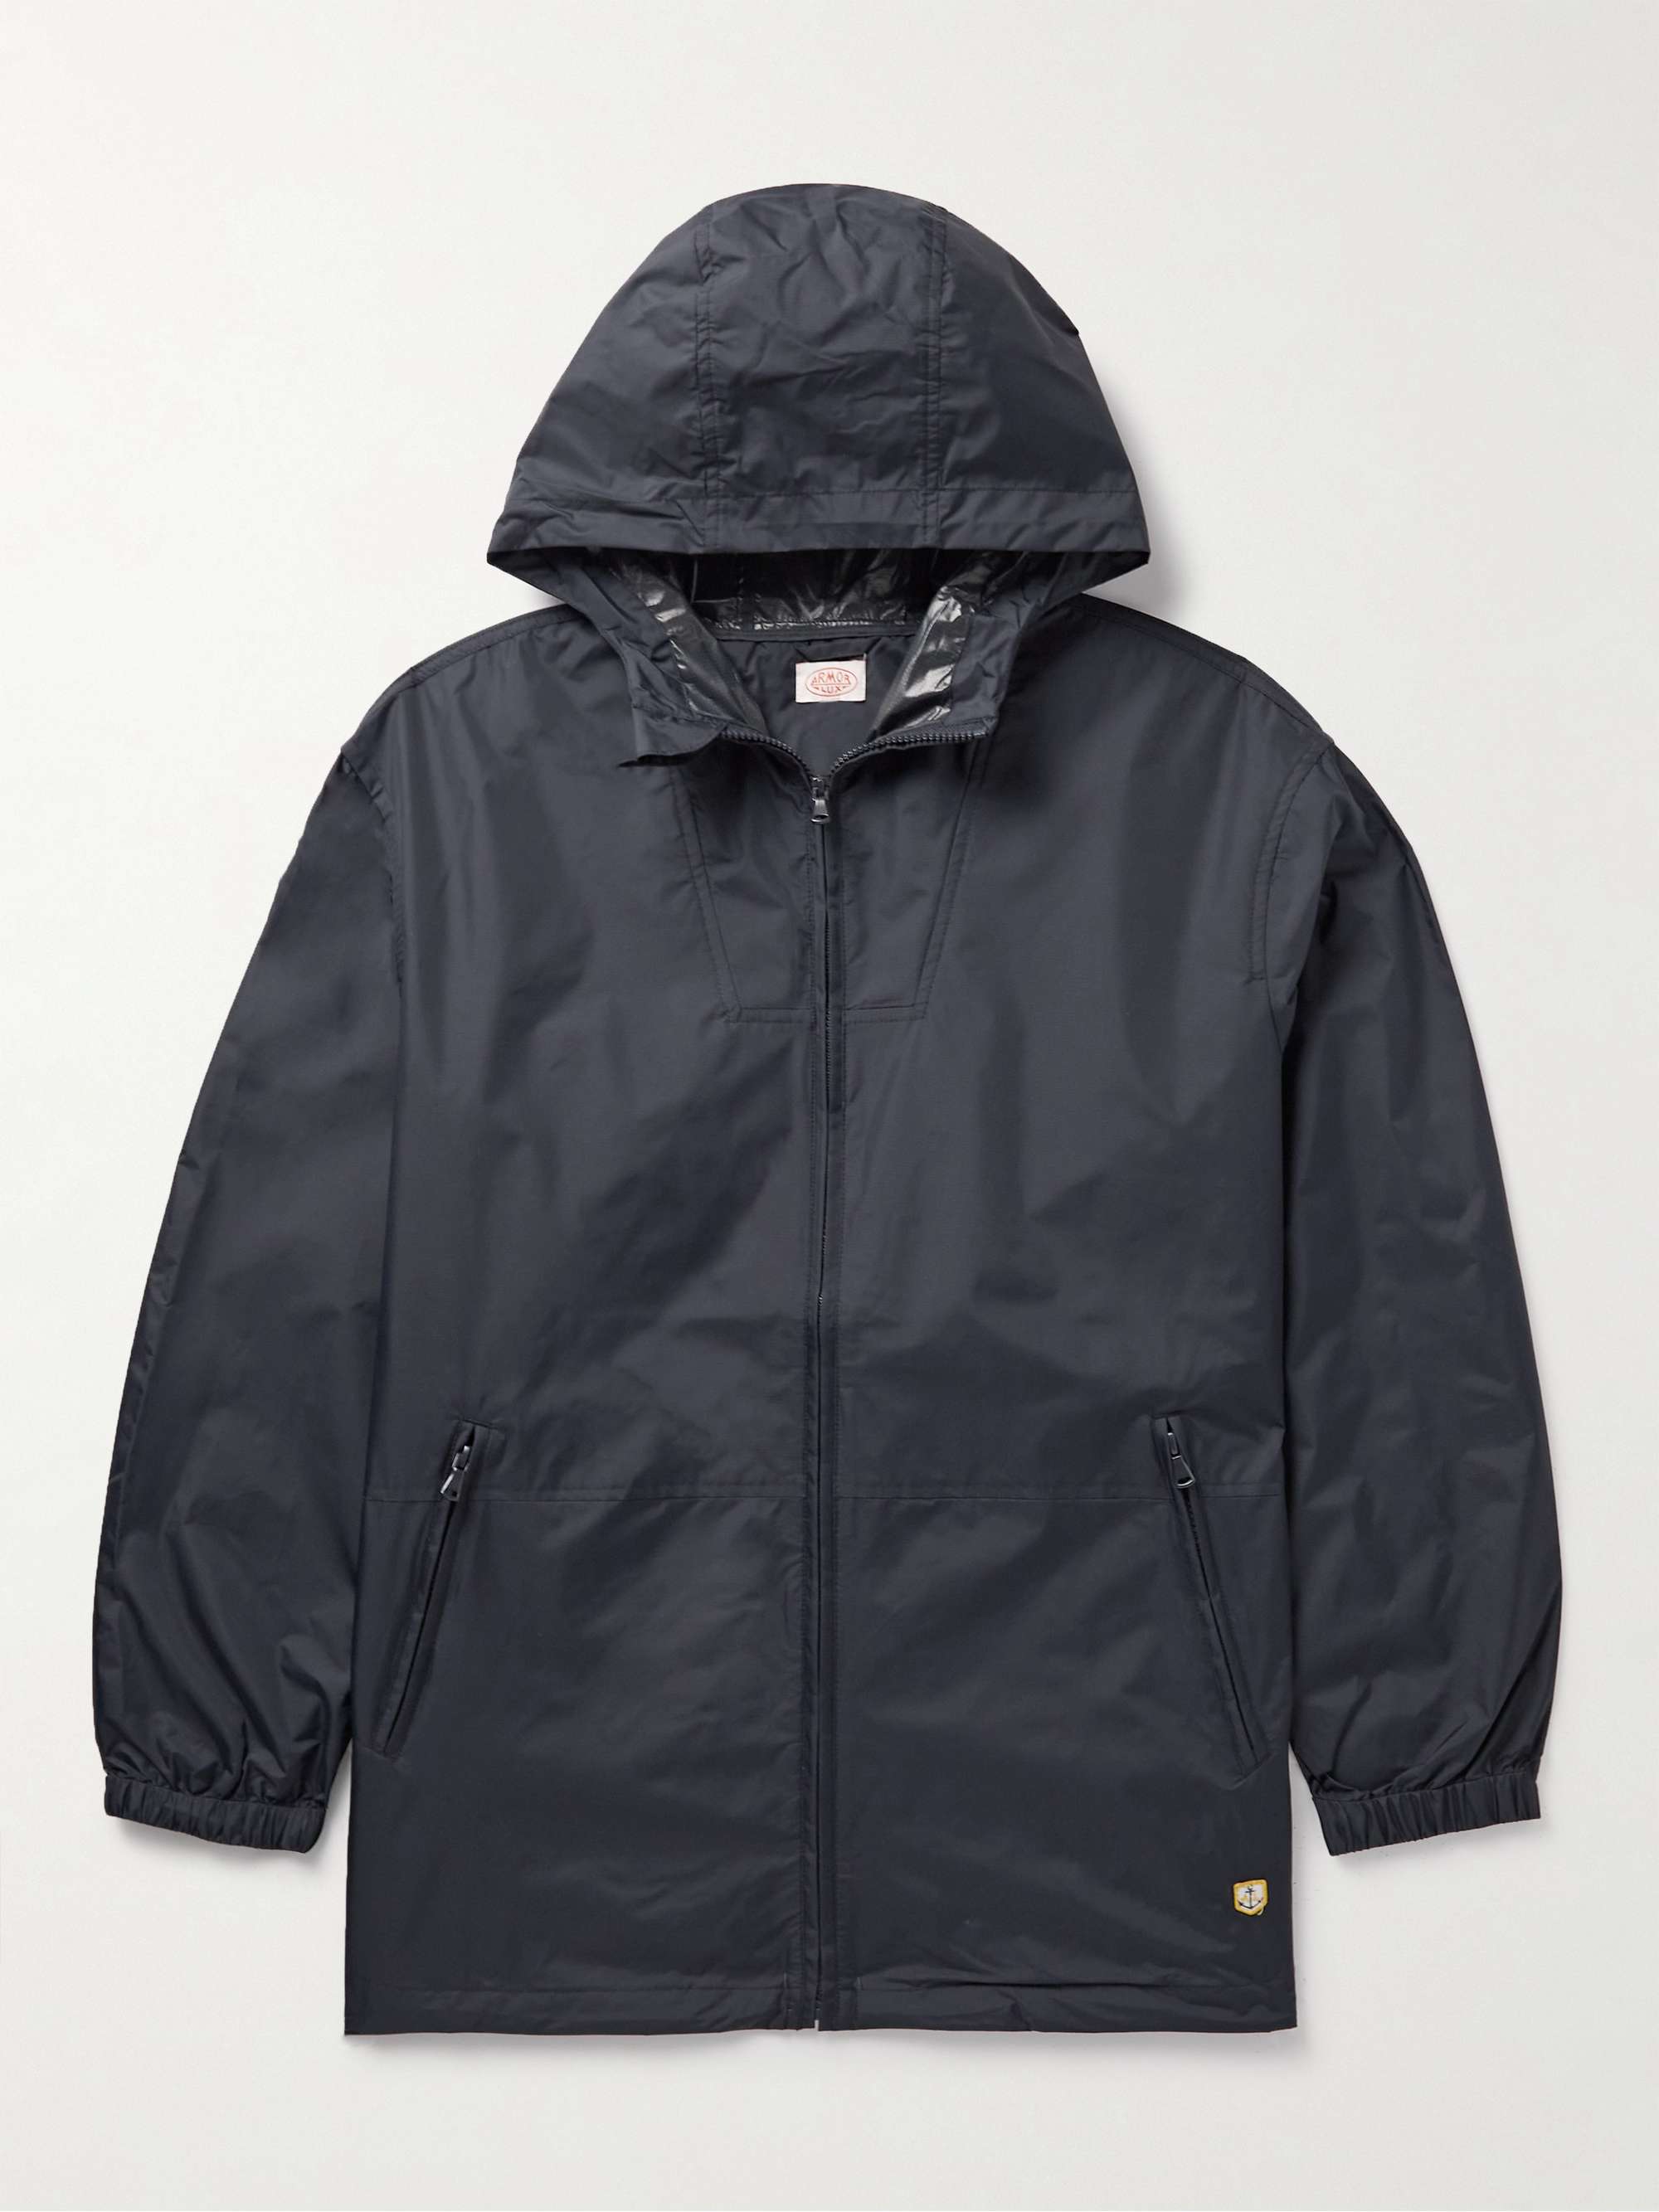 ARMOR-LUX Ripstop Hooded Jacket